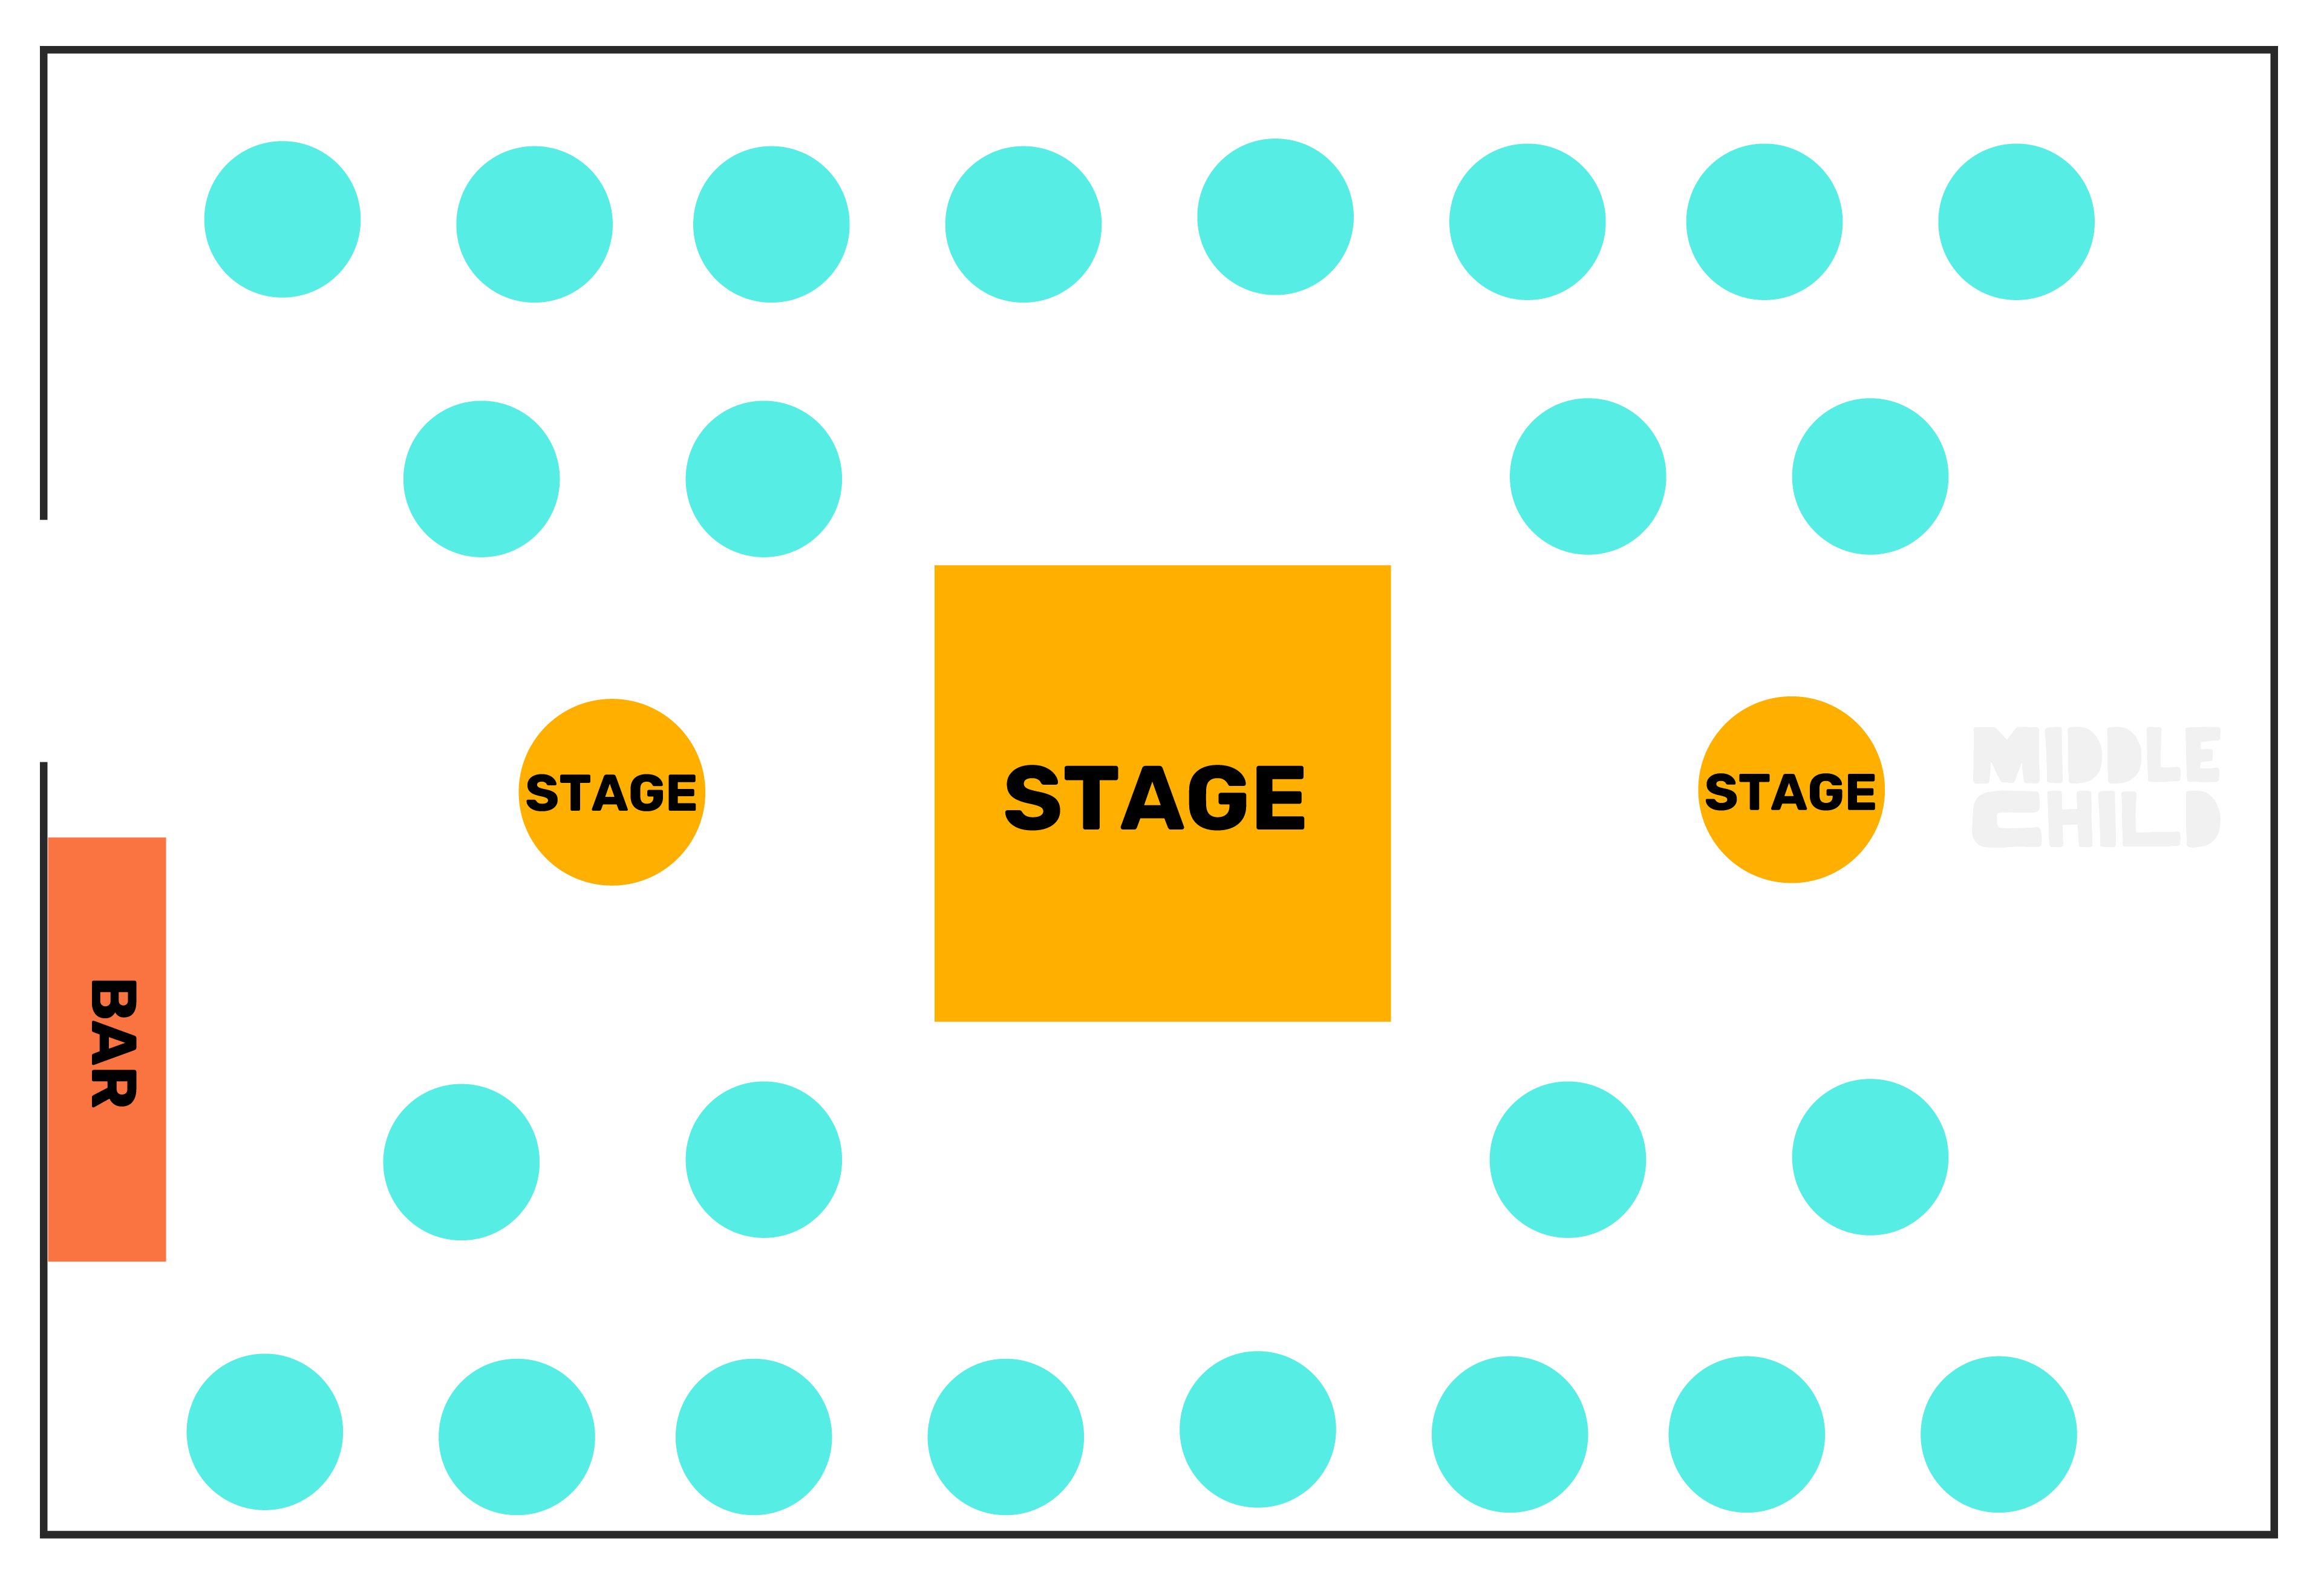 Seating plan of the venue, featuring tables placed around a central stage, with two additional smaller stages.